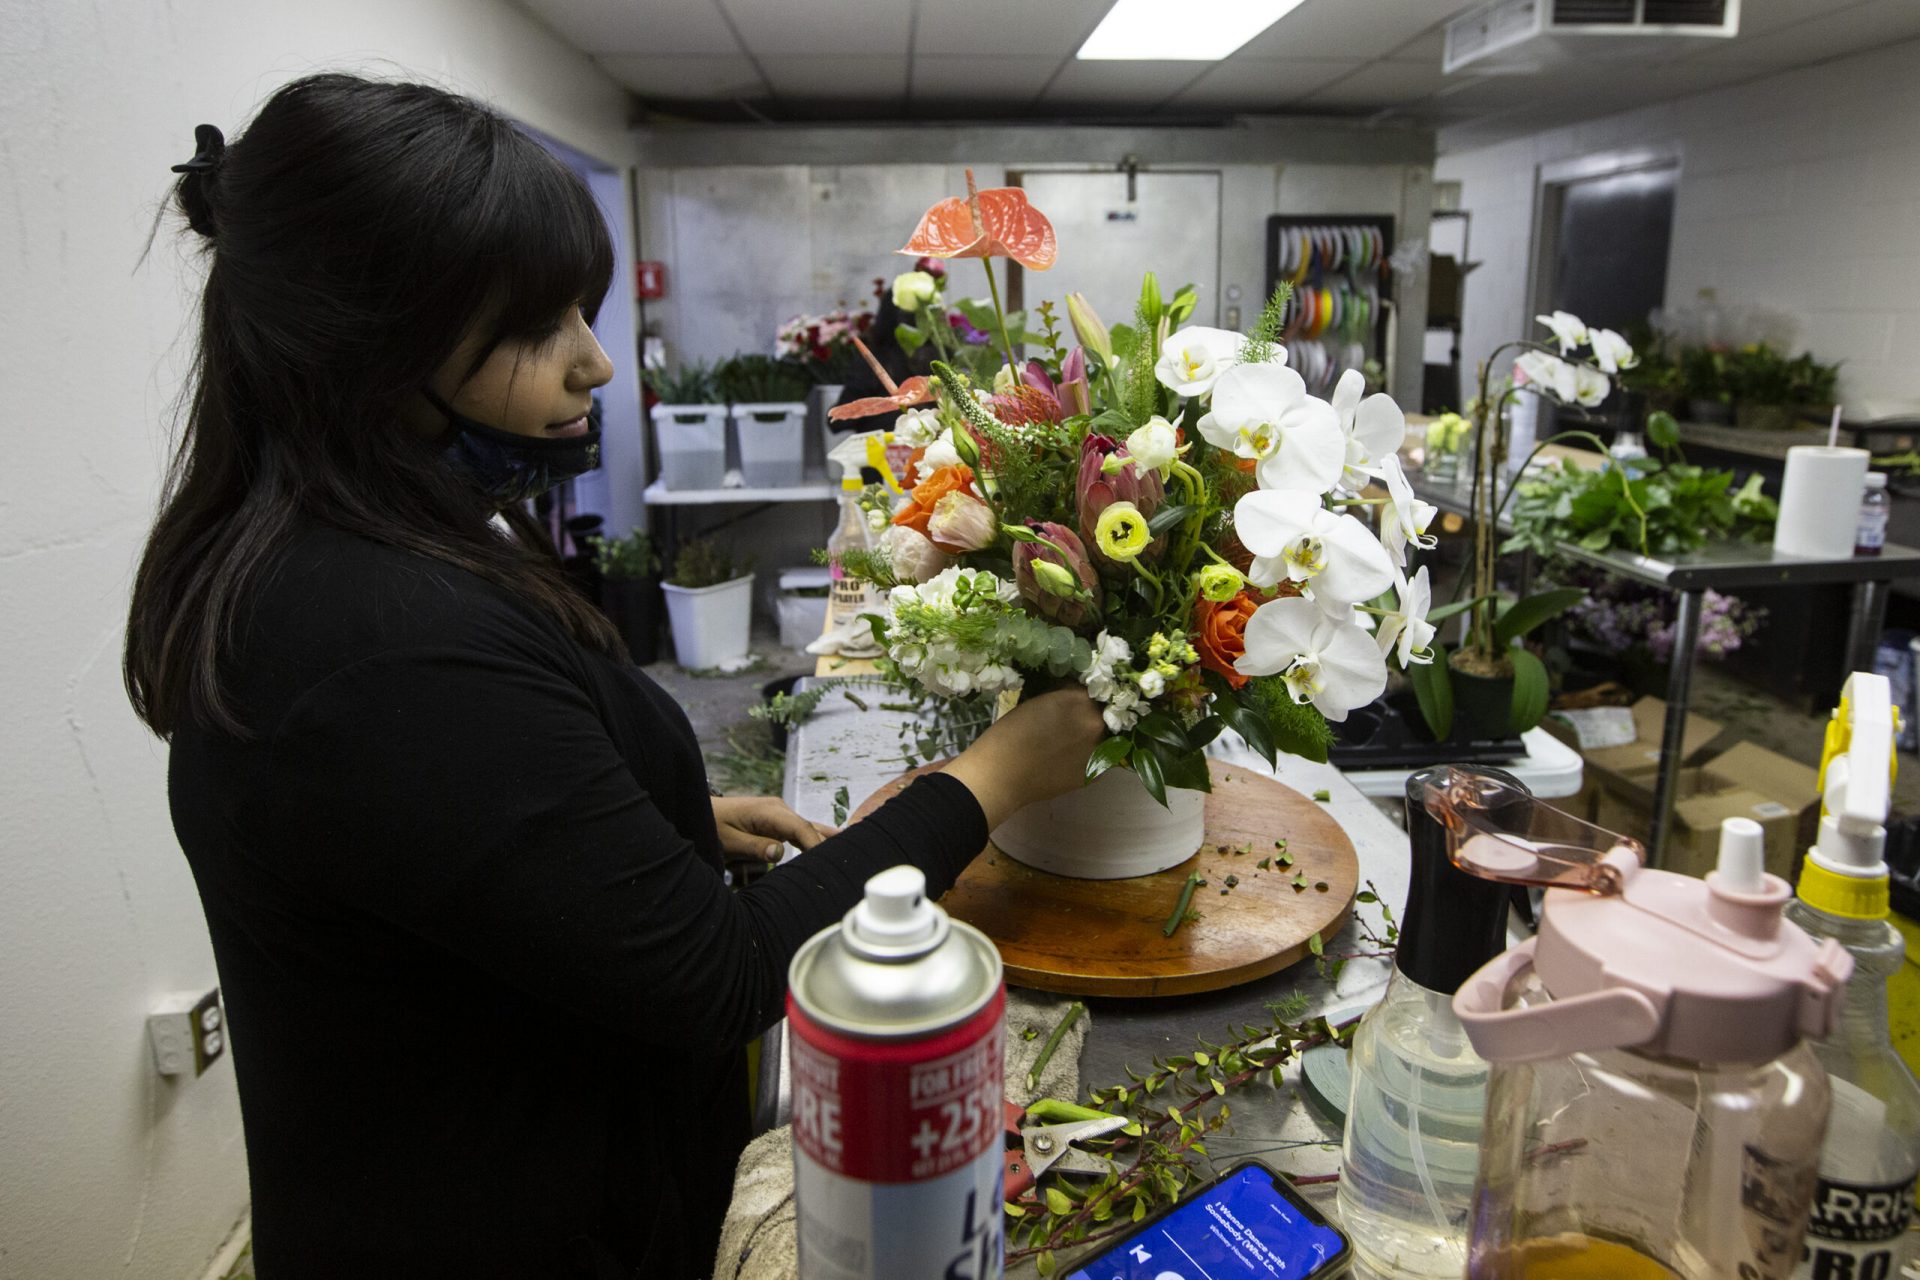 Pandemic doesn’t stop local flower shop - Odessa American